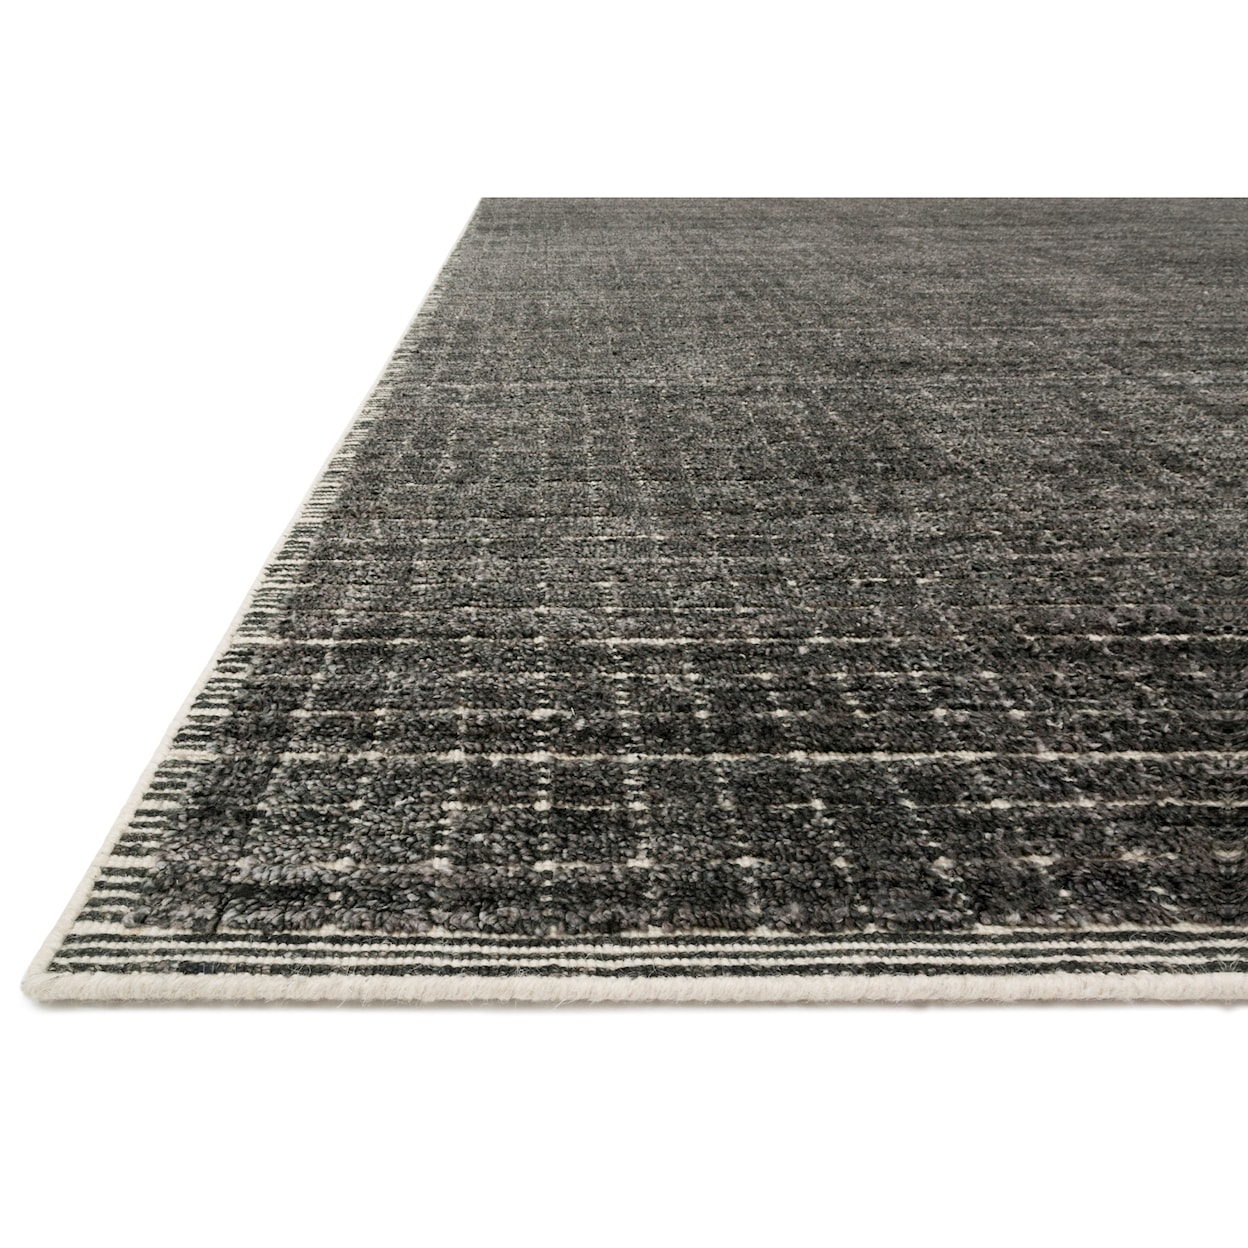 Reeds Rugs Beverly 2'6" x 8'6" Charcoal Rug